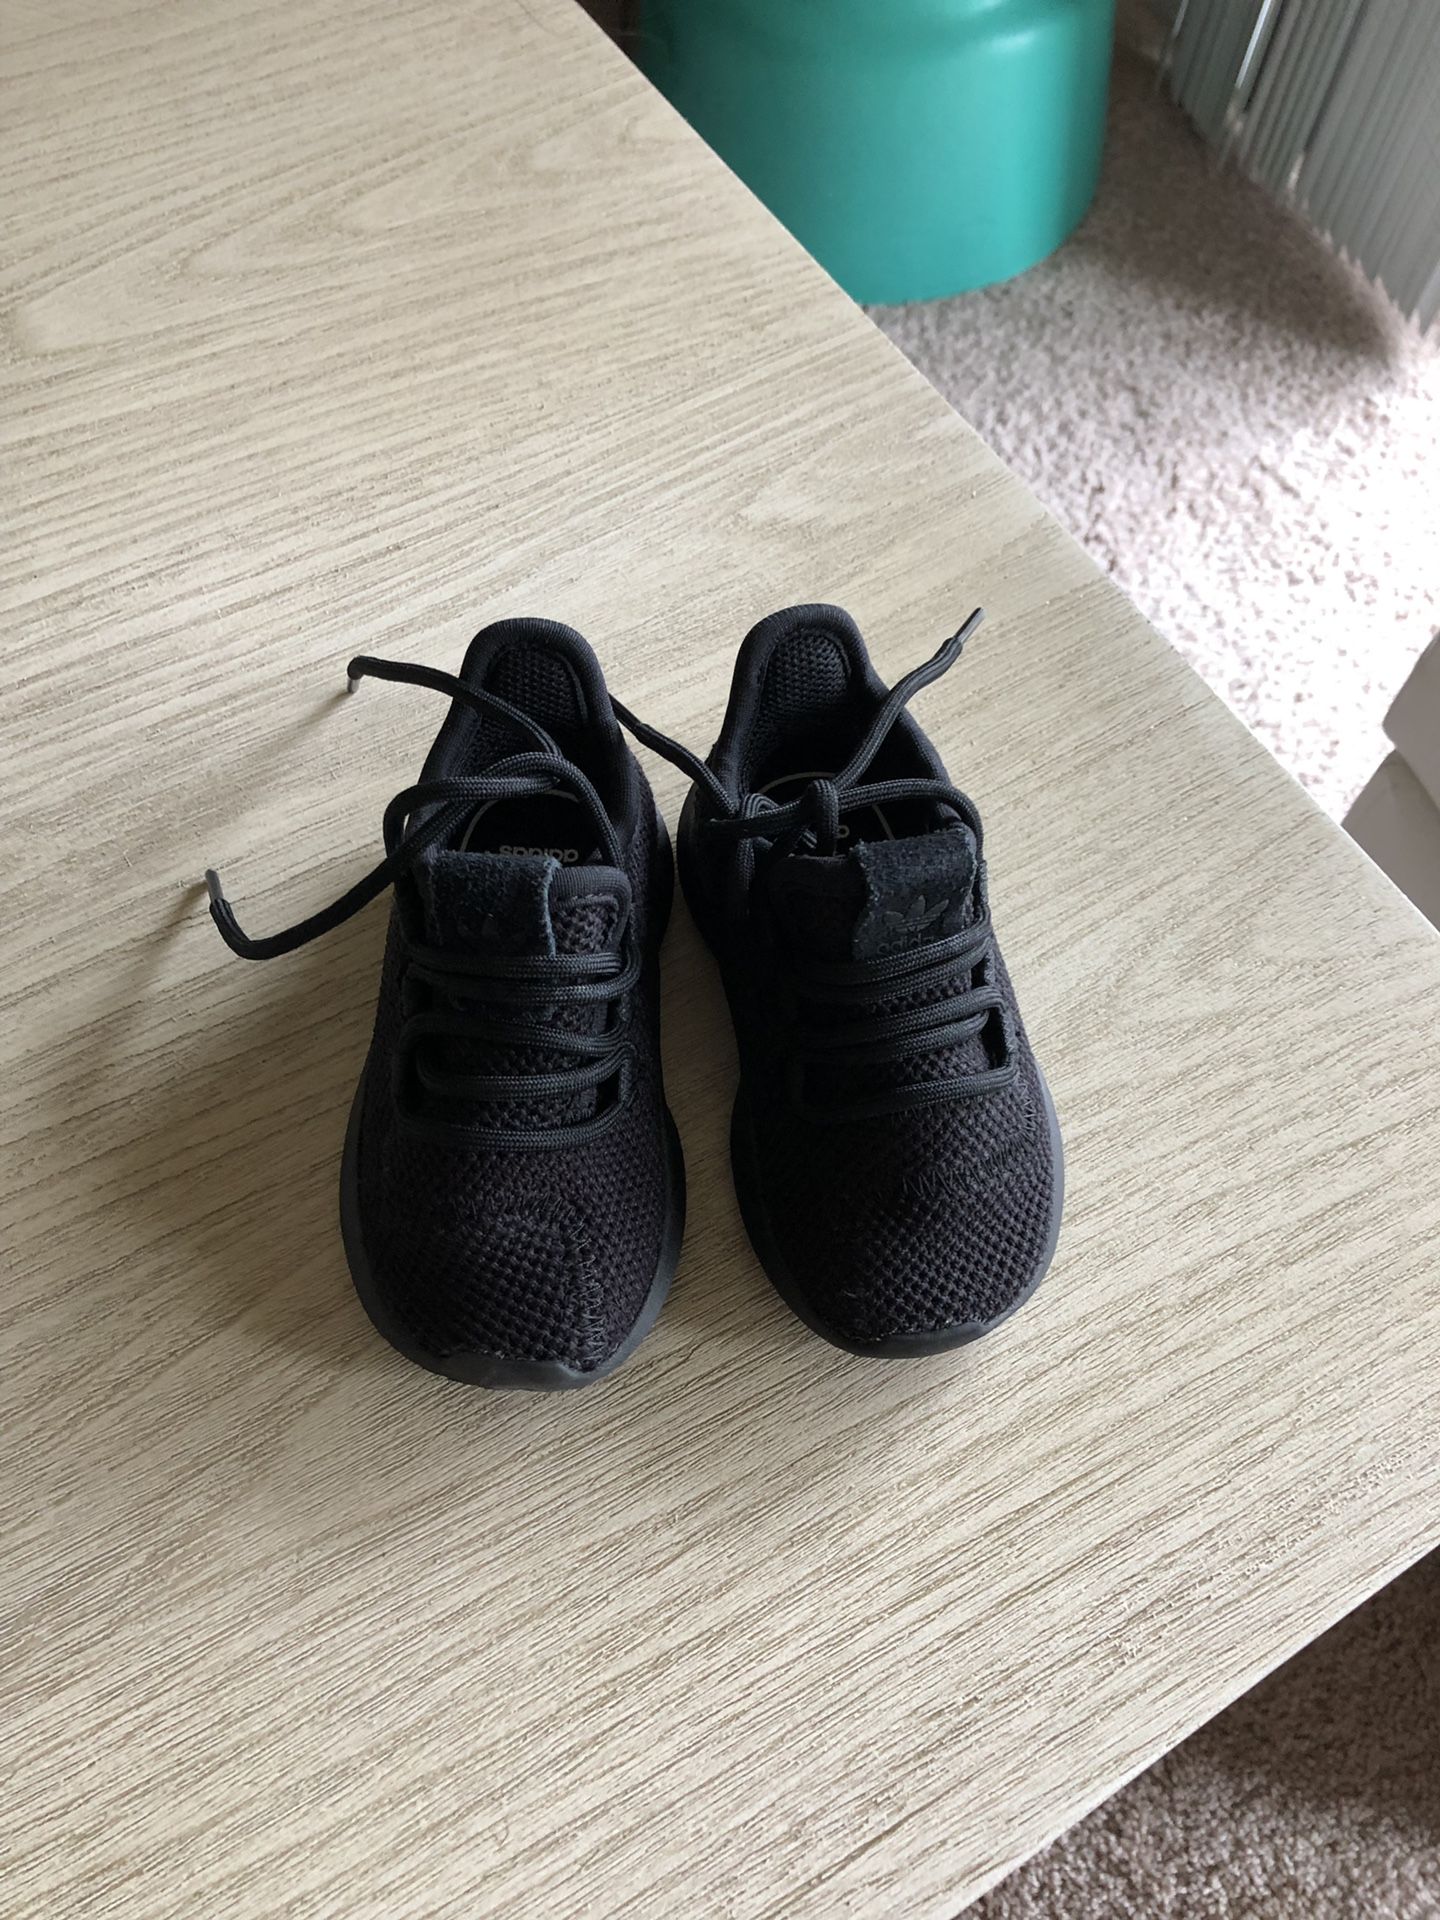 adidas baby shoes 4c